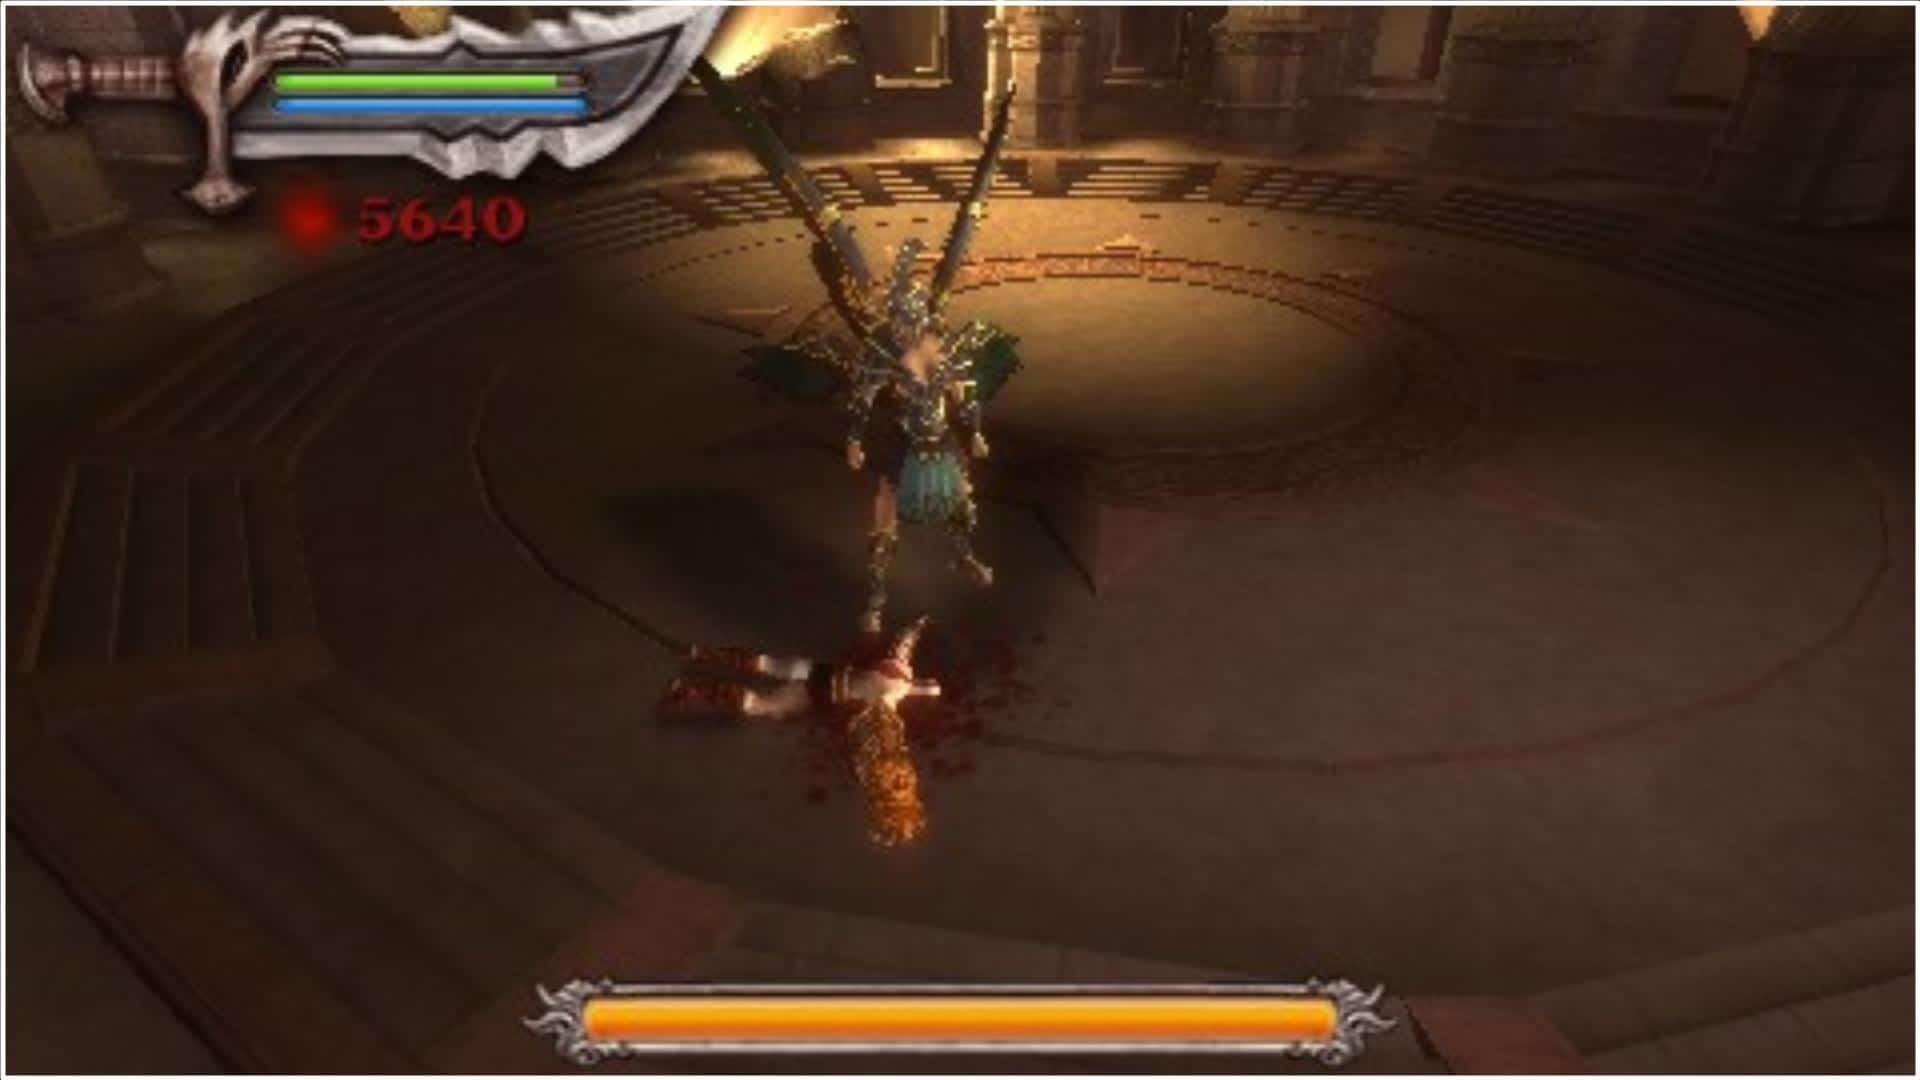 God of War - Chains of Olympus (USA) ISO < PSP ISOs